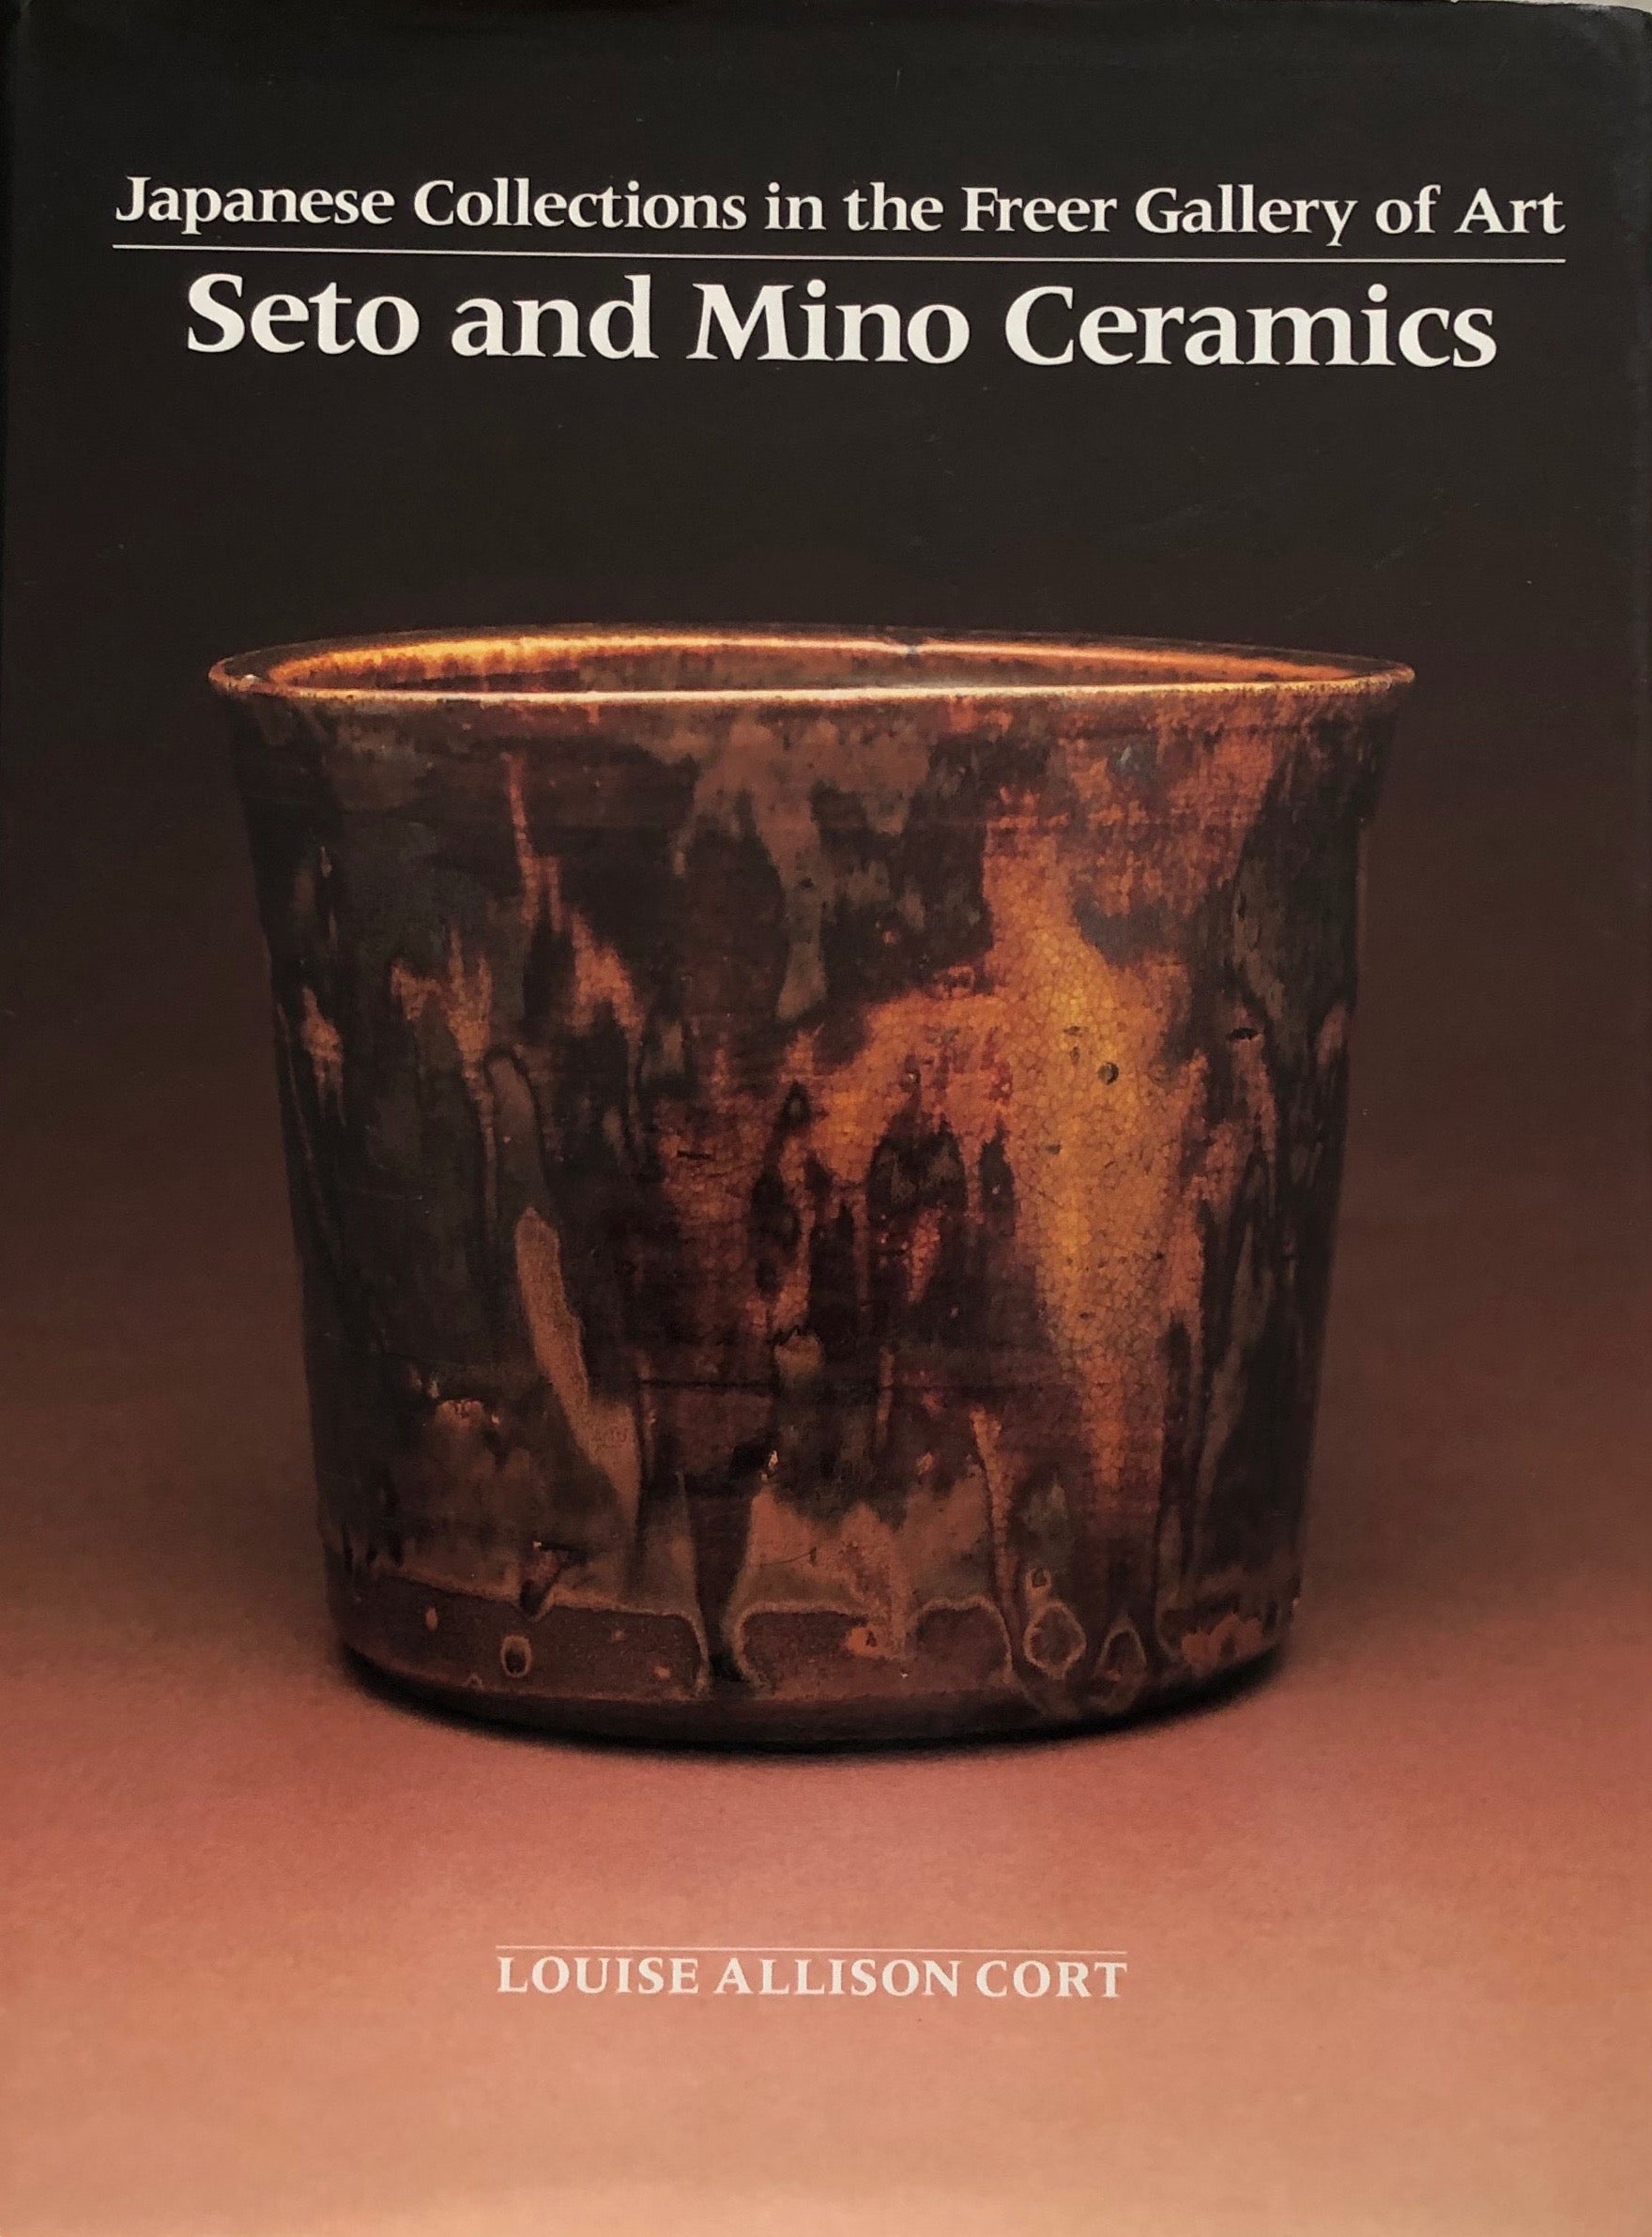 Seto and Mino Ceramics by Louise AllisonCort , Book